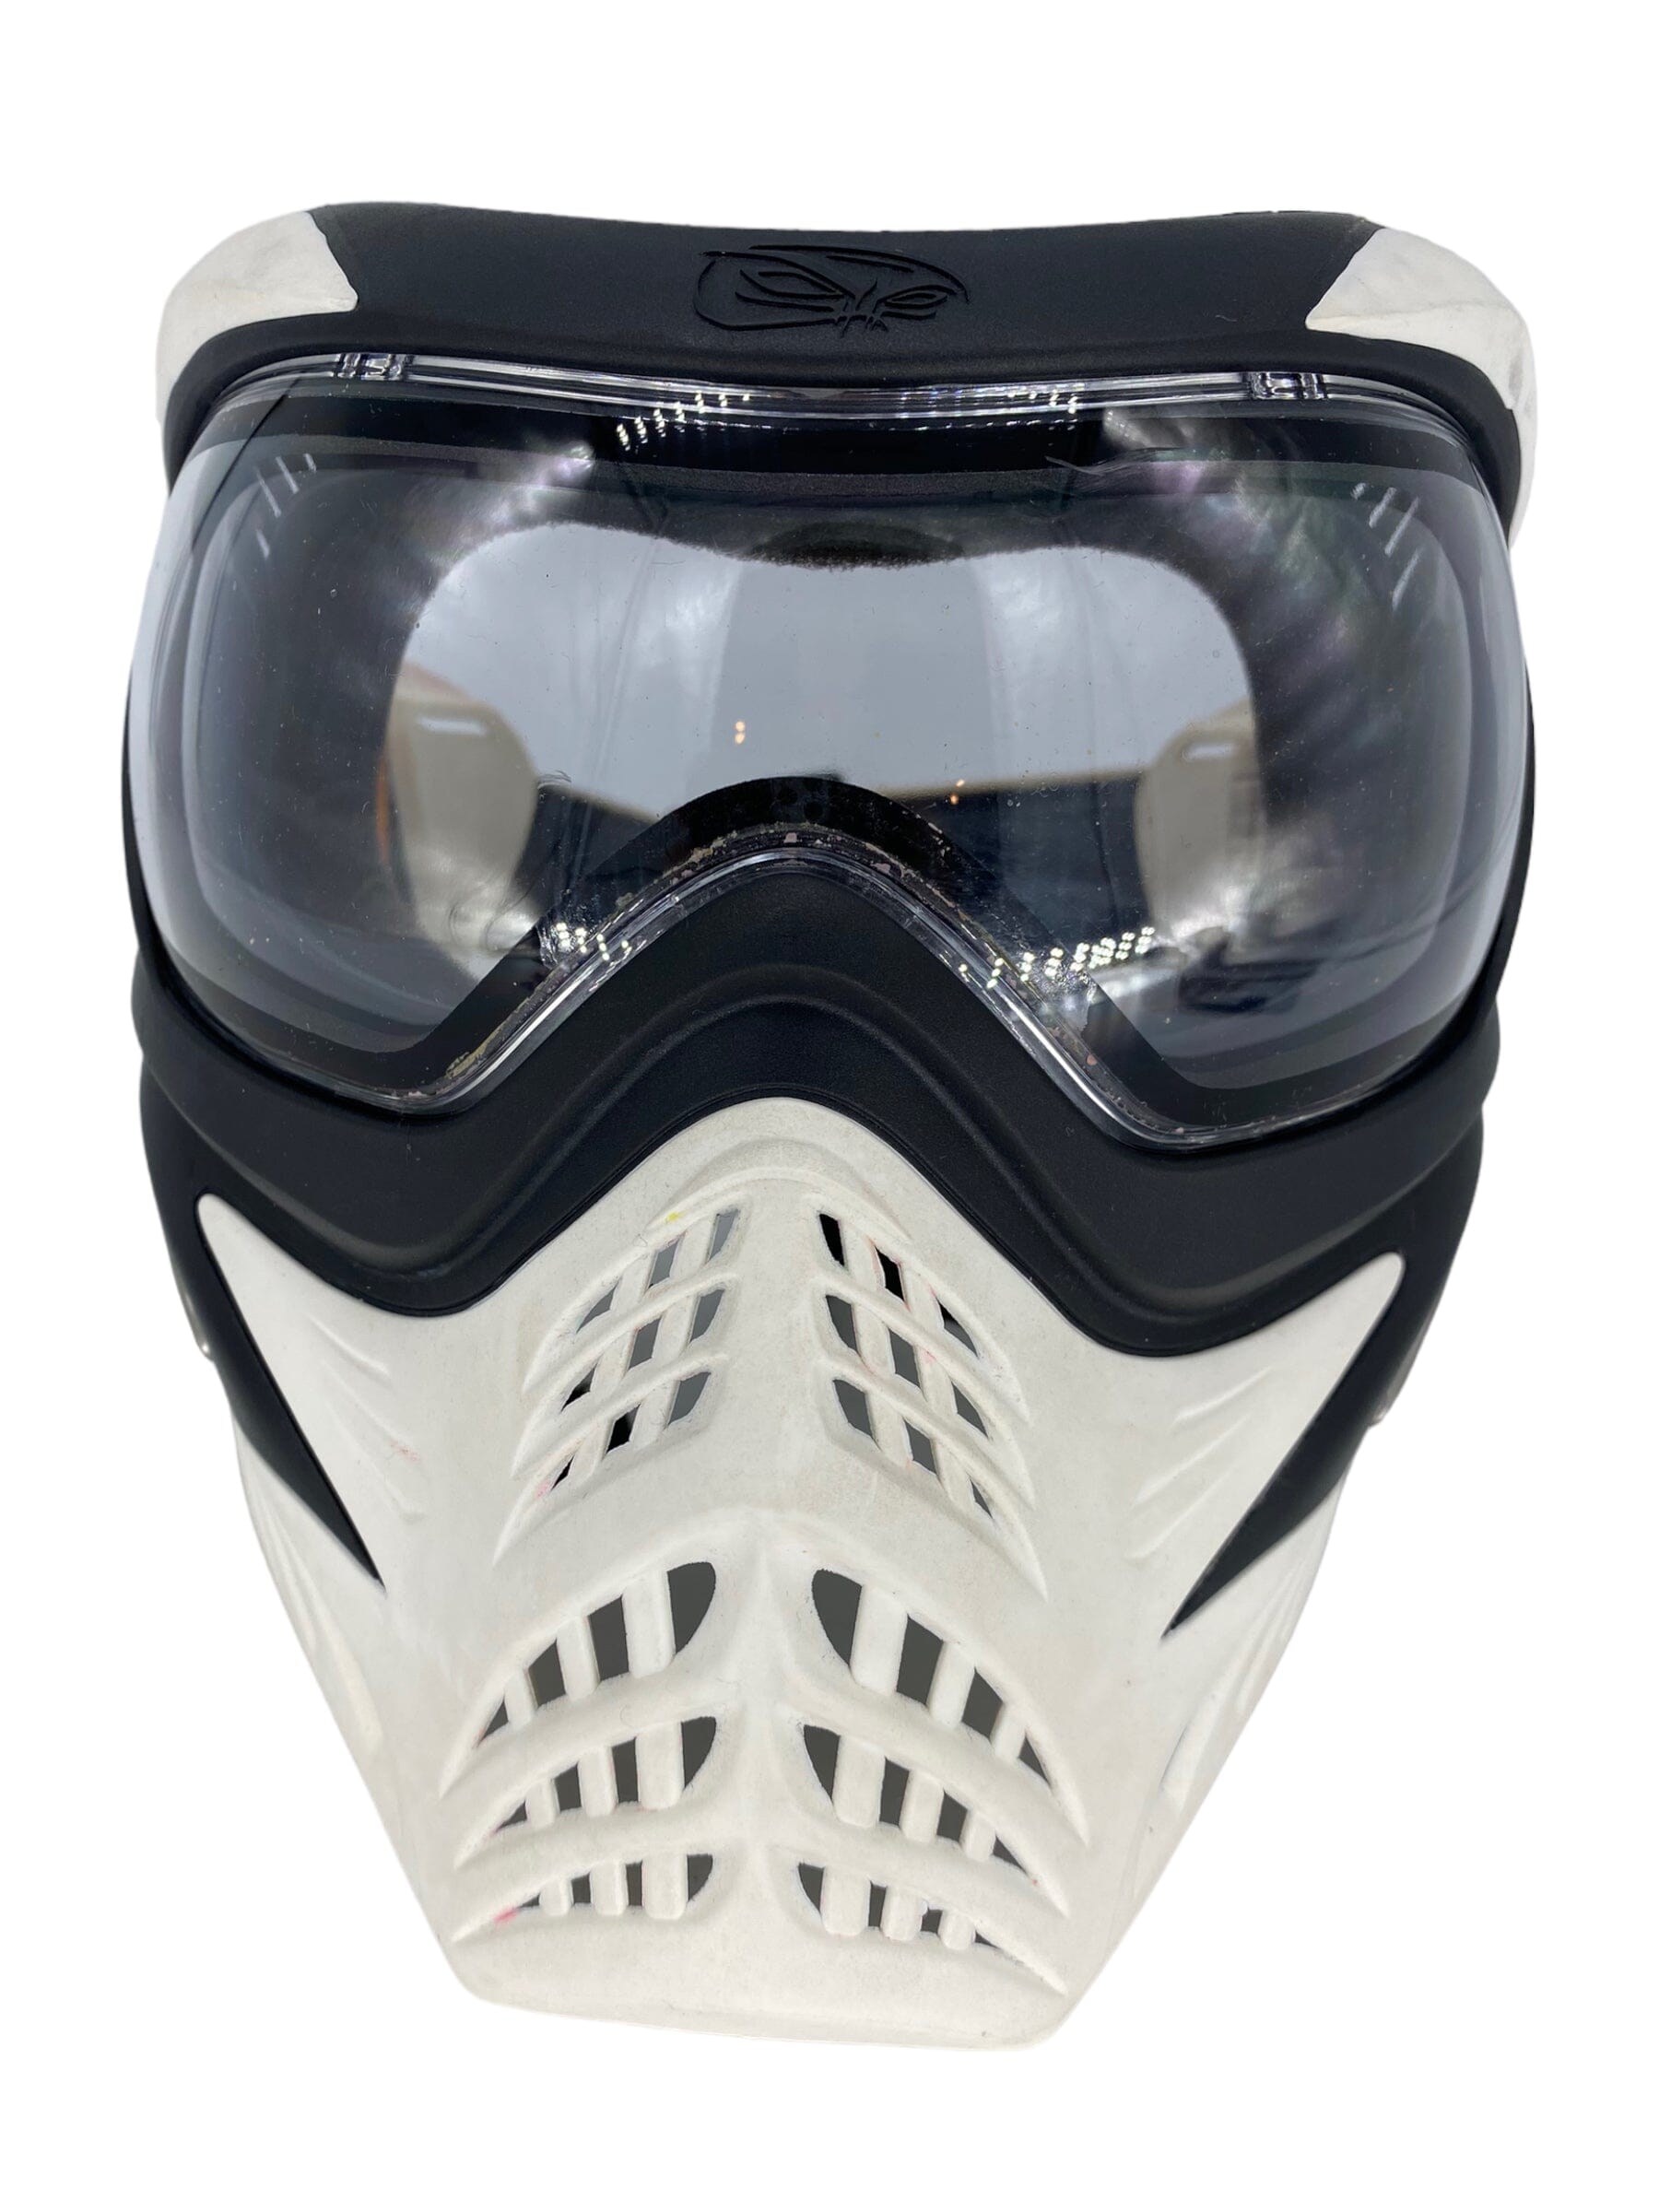 Used V Force Grill Paintball Mask Paintball Gun from CPXBrosPaintball Buy/Sell/Trade Paintball Markers, Paintball Hoppers, Paintball Masks, and Hormesis Headbands